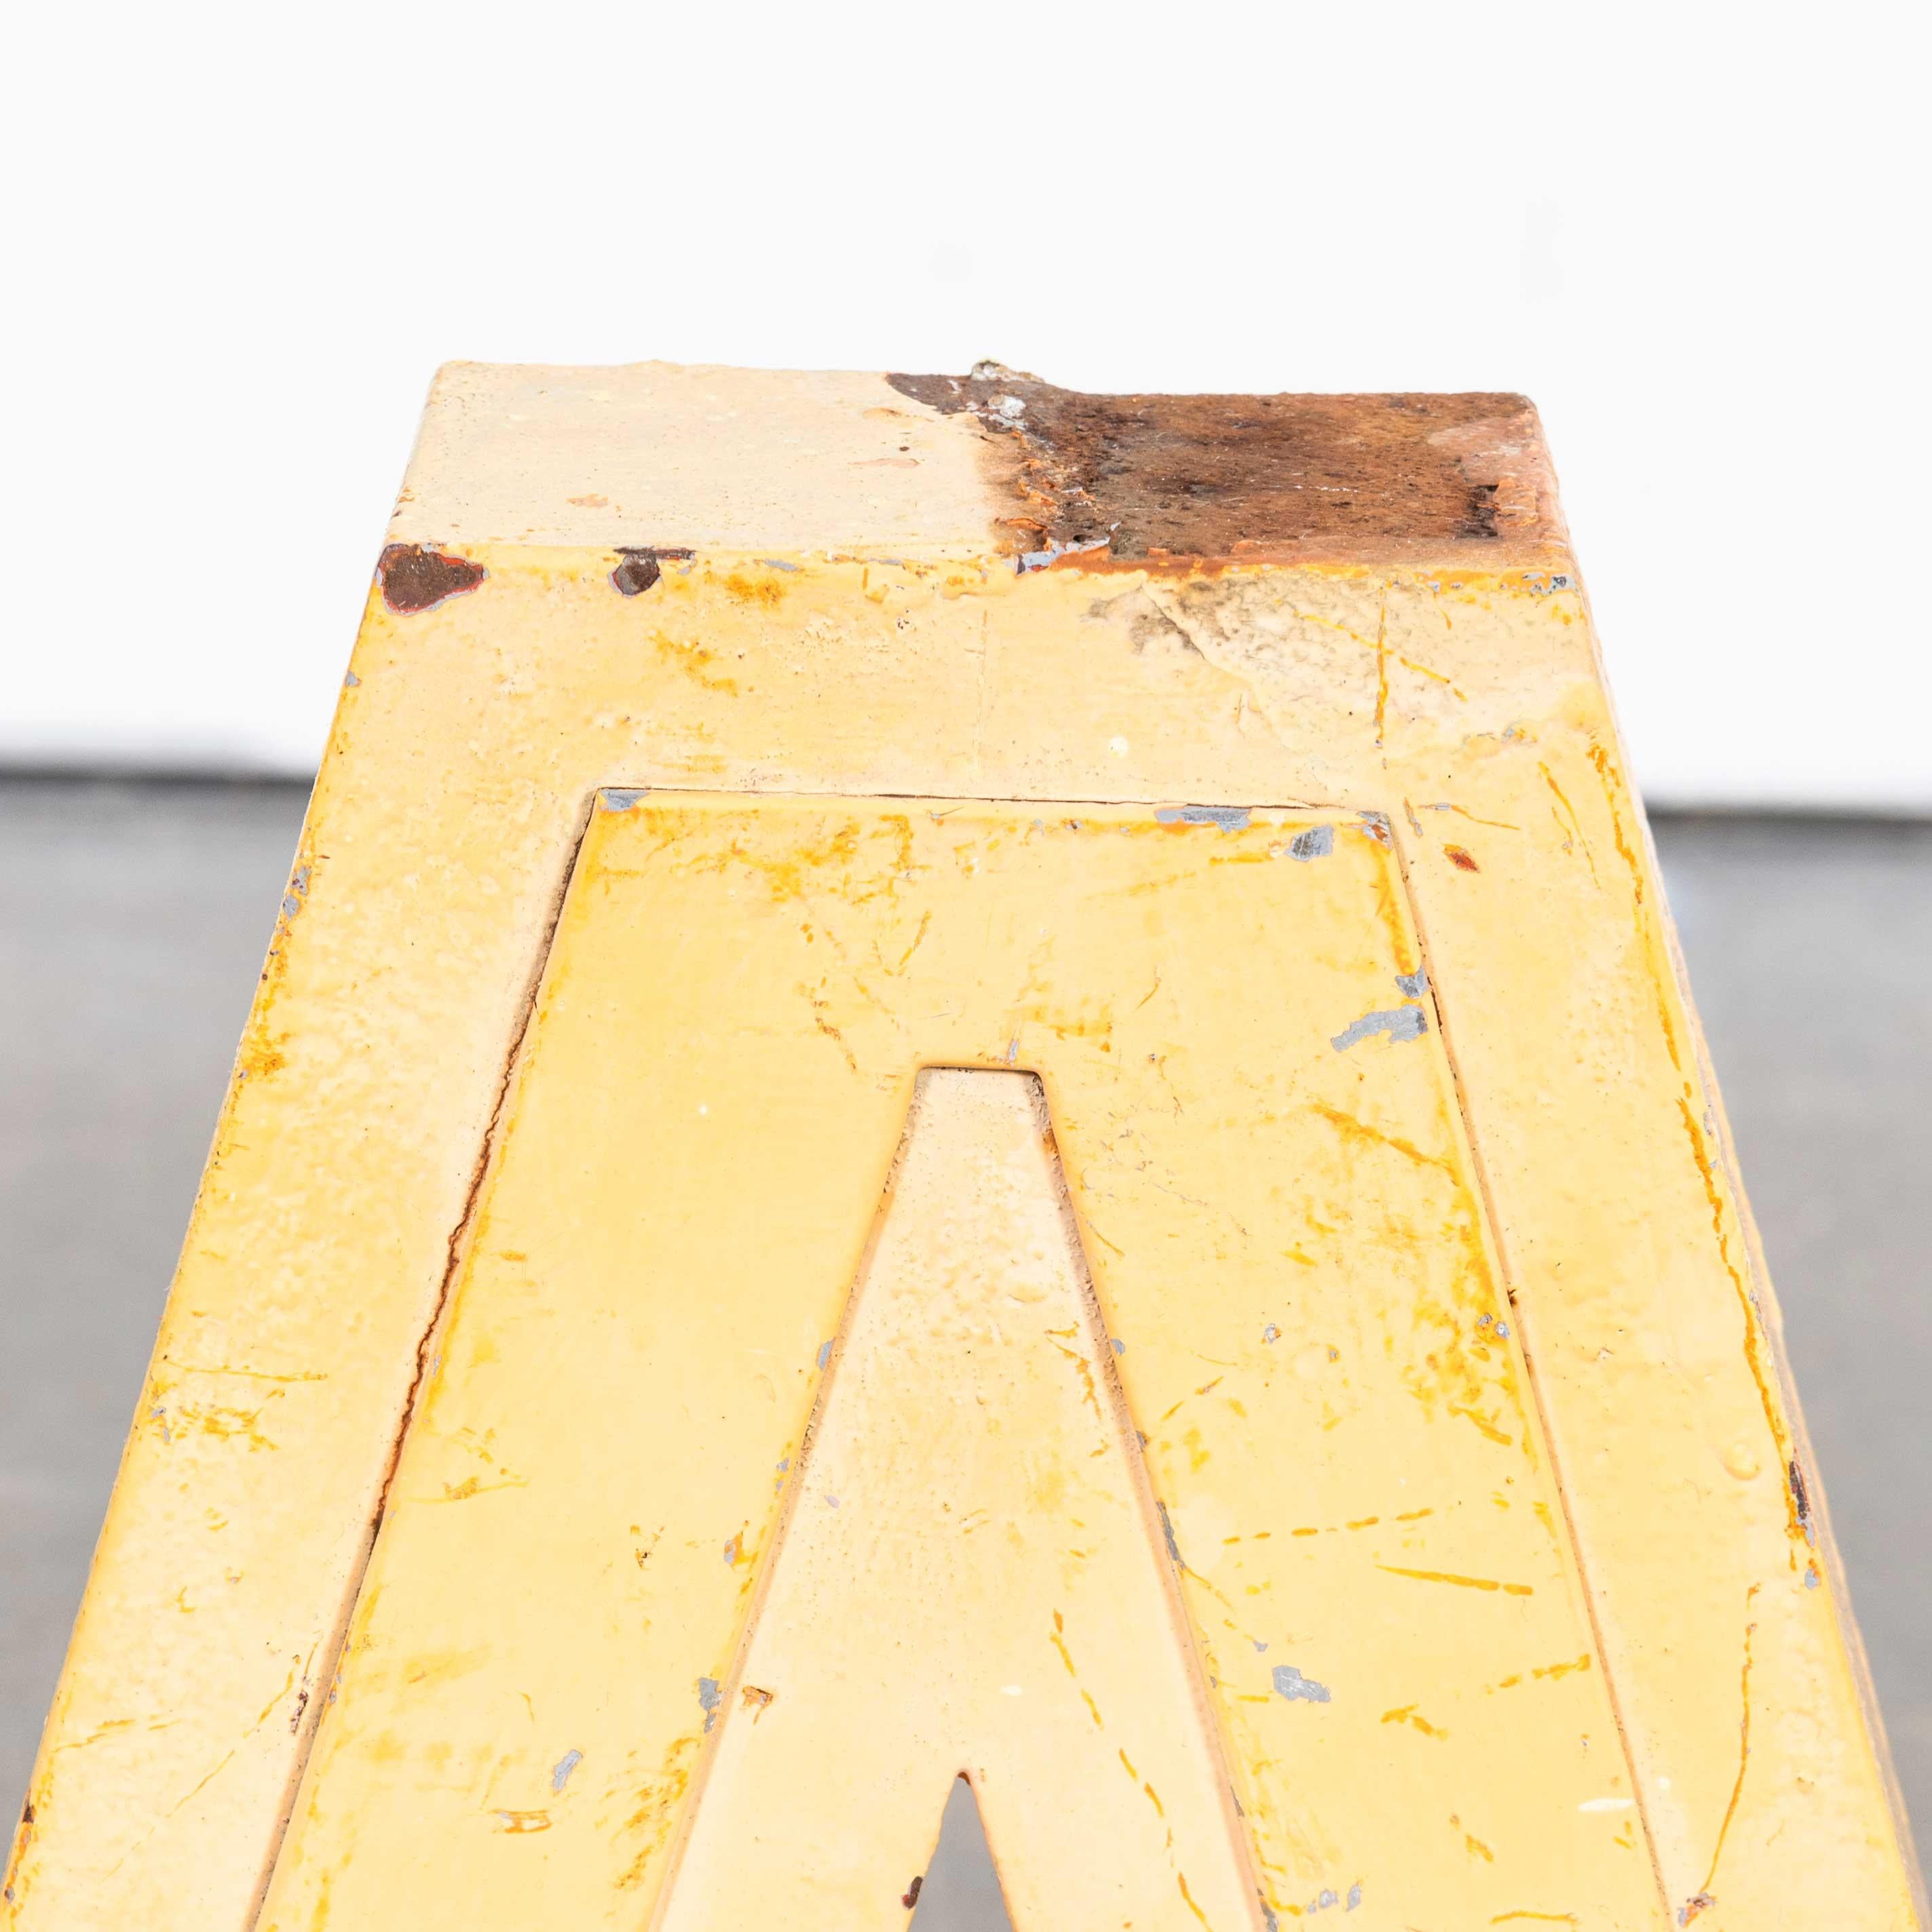 Chunky Vintage French Signage Letter – Medium A
Chunky Vintage French Signage Letter . Chunky and heavy weight signage letter with lovely faded paint. Dimensions 7x30x26 LHW all cm.

WORKSHOP REPORT
Our workshop team inspect every product and carry